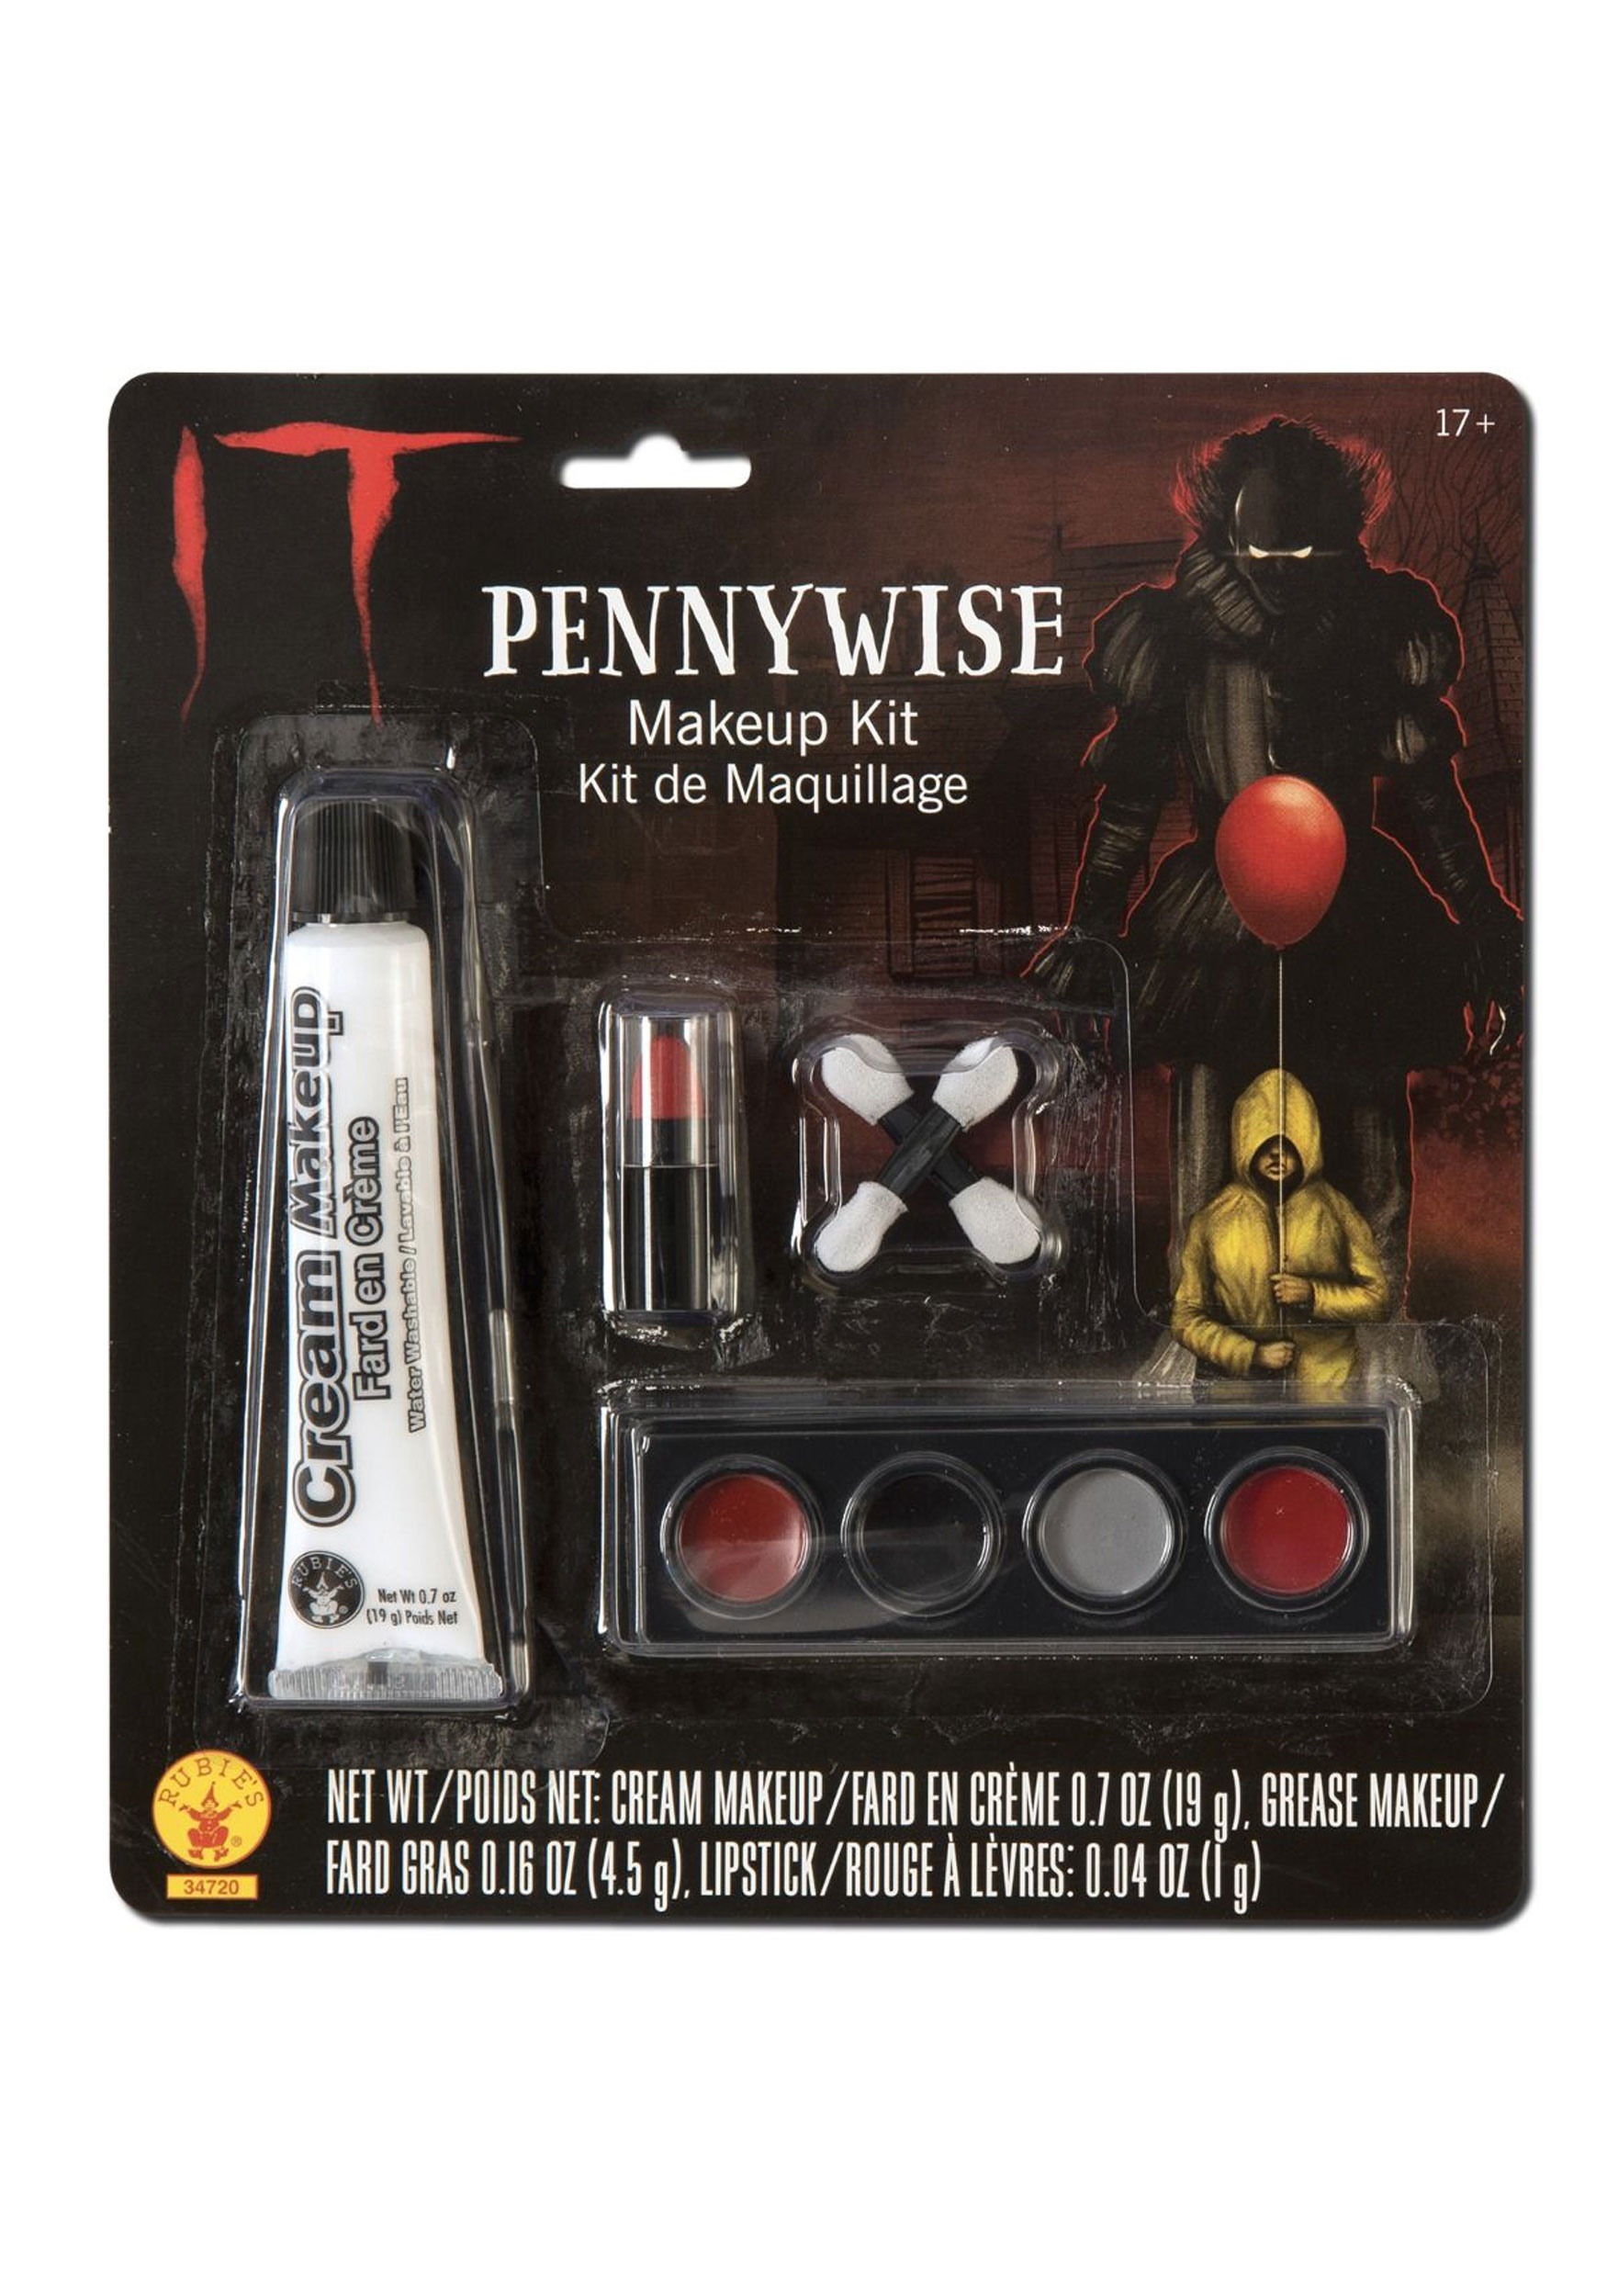 It: The Movie Pennywise Makeup Kit NUEVO Multicolor Colombia